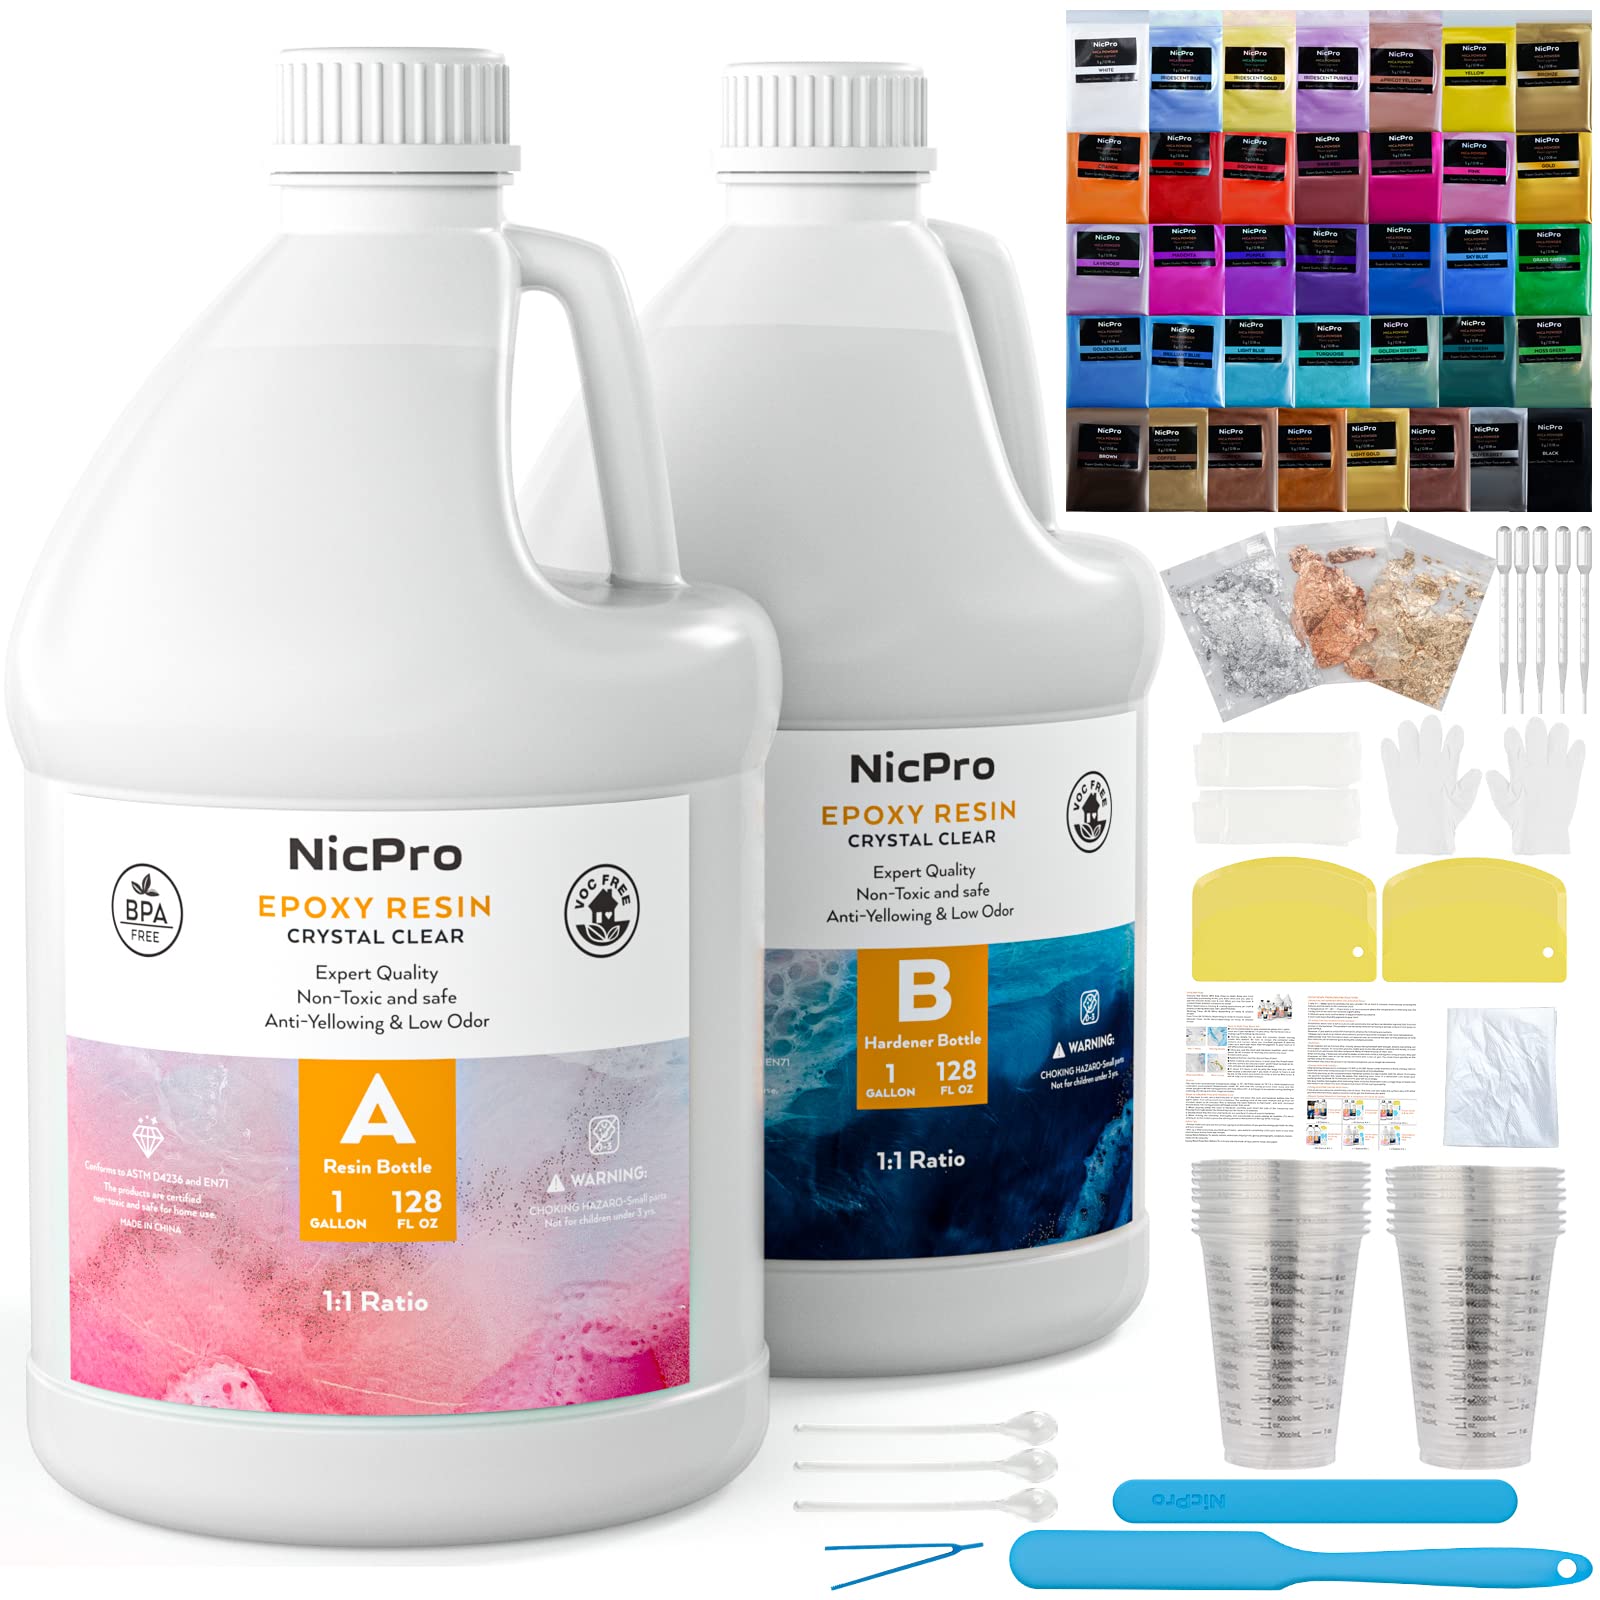 Nicpro 2 Gallon Crystal Clear Epoxy Resin Kit, Casting and Coating